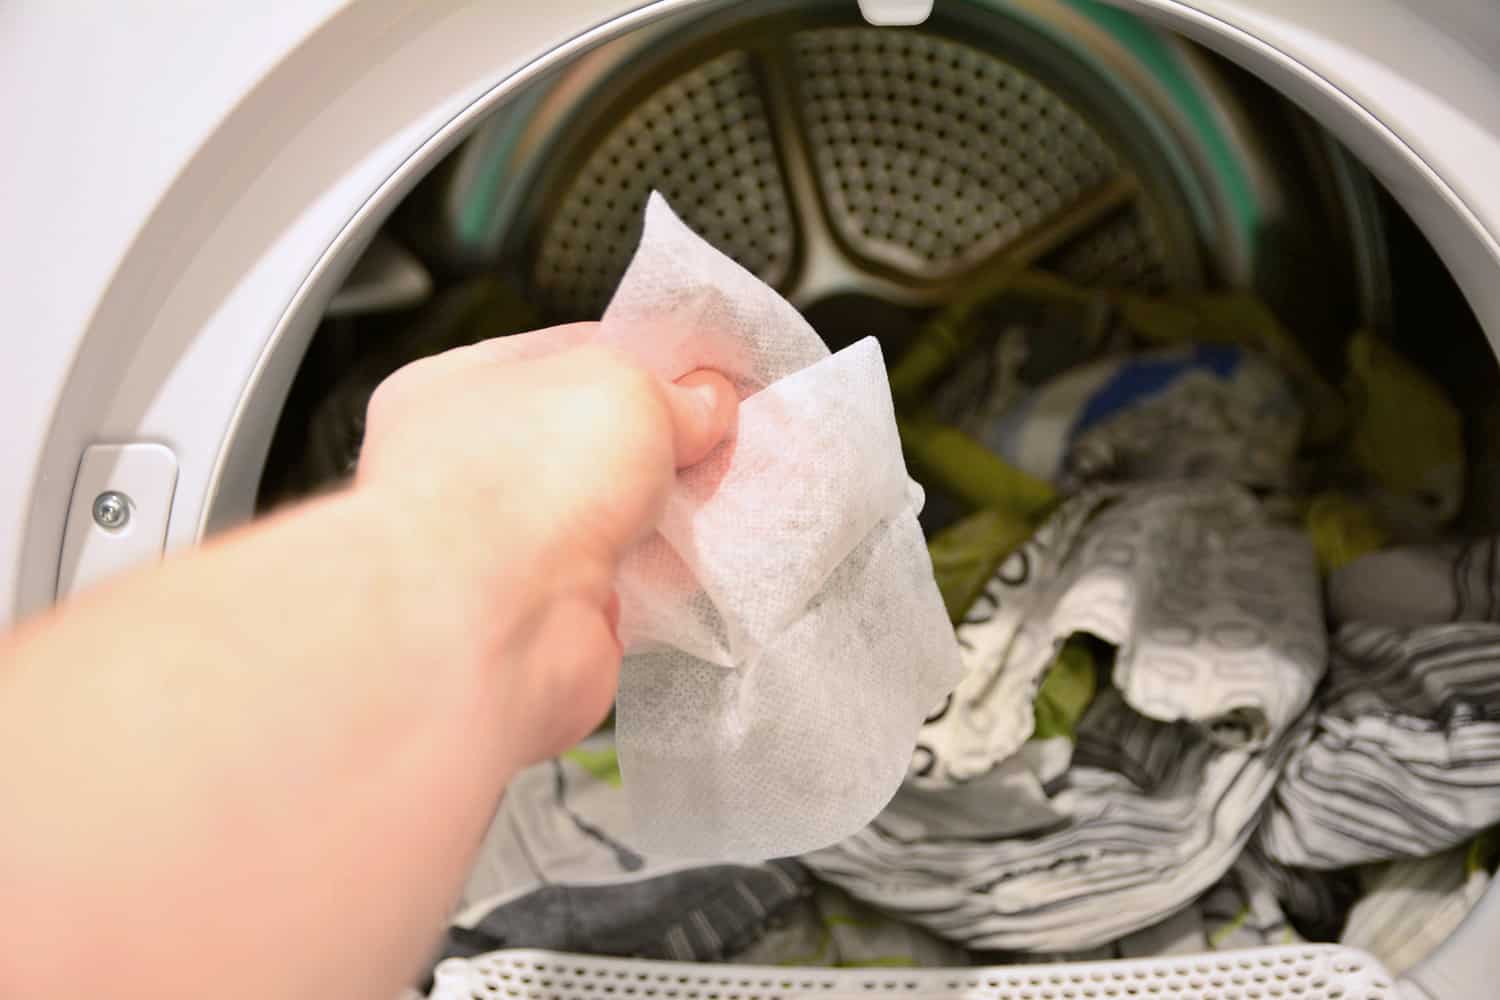 Hand holding and put dryer sheet into a tumble clothes dryer.